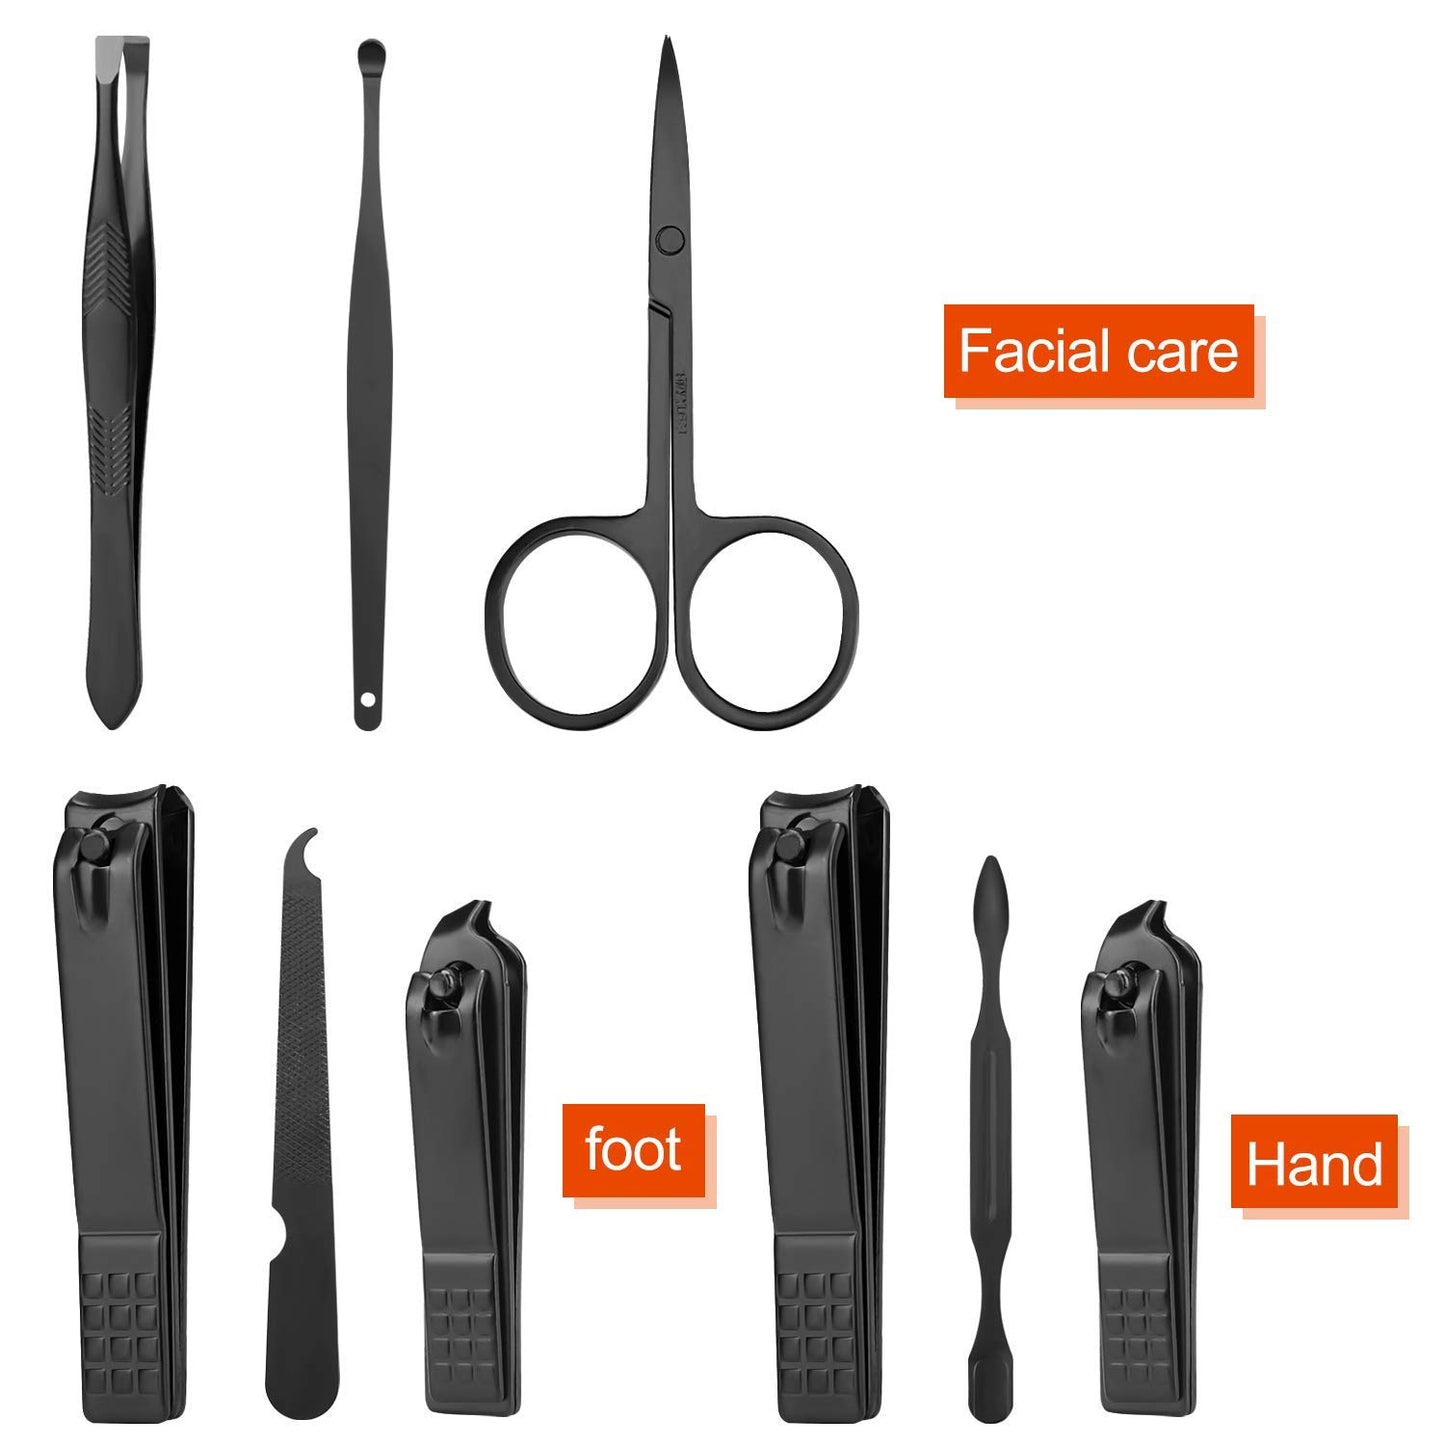 Manicure Set Personal Care Nail Clipper Kit Manicure Professional Pedicure Set Mens Accessories Personal Care Set Grooming Kit Fathers Gift for Men Husband Boyfriend Parent